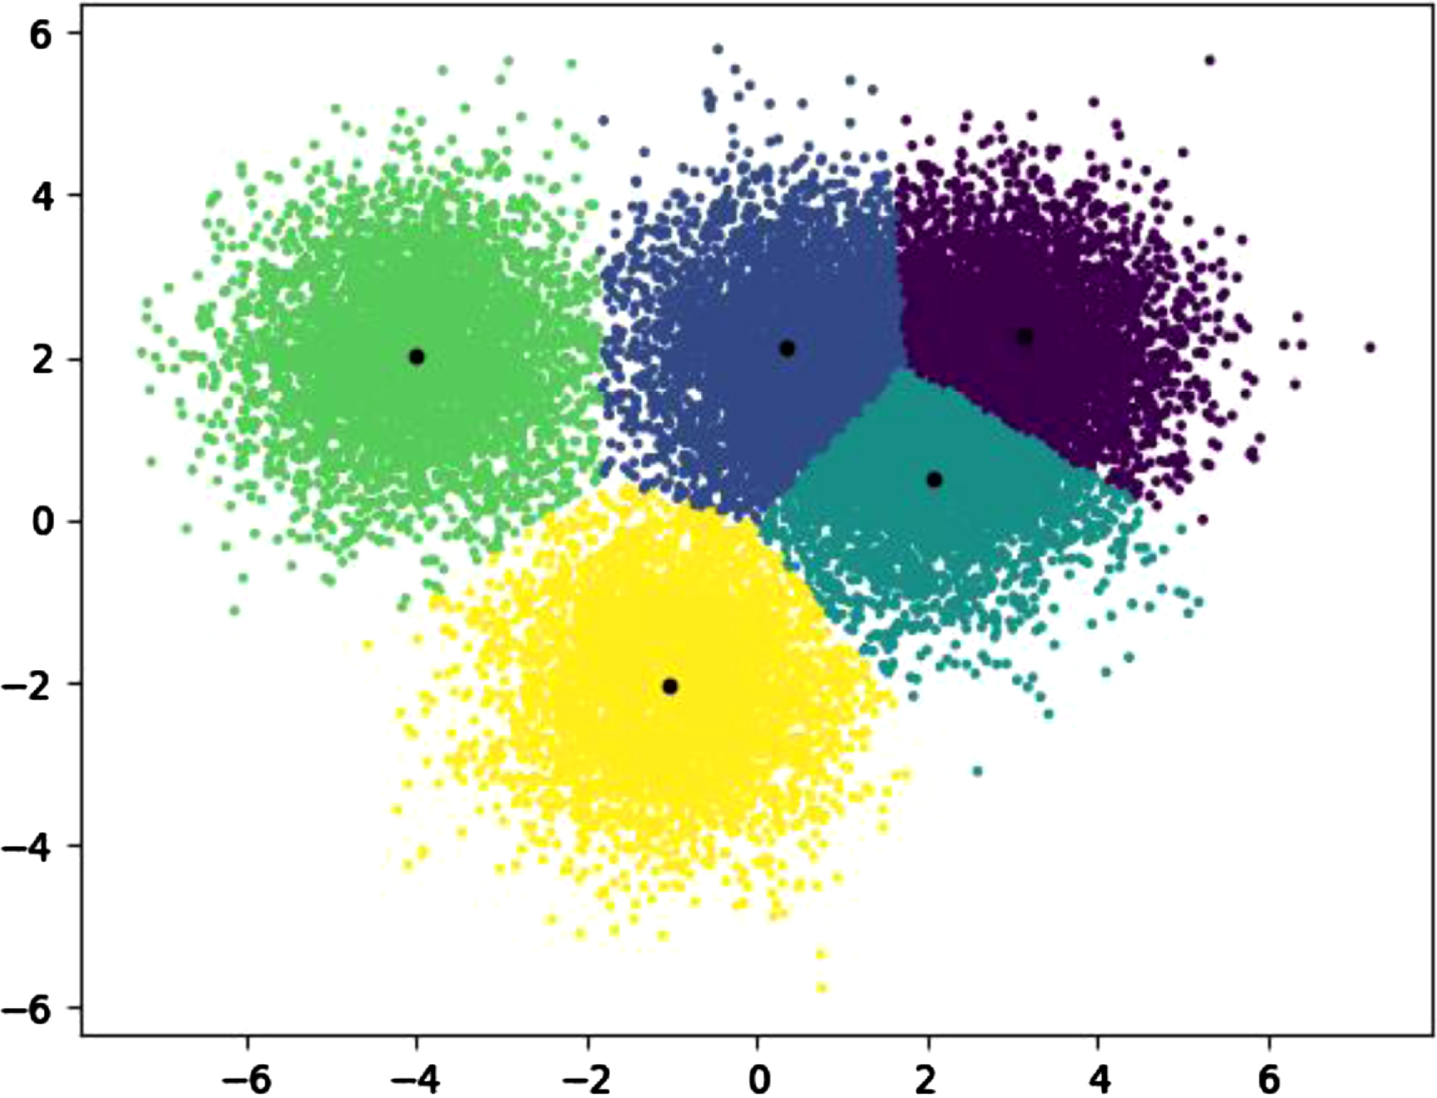 Learning style clustering and grouping results.